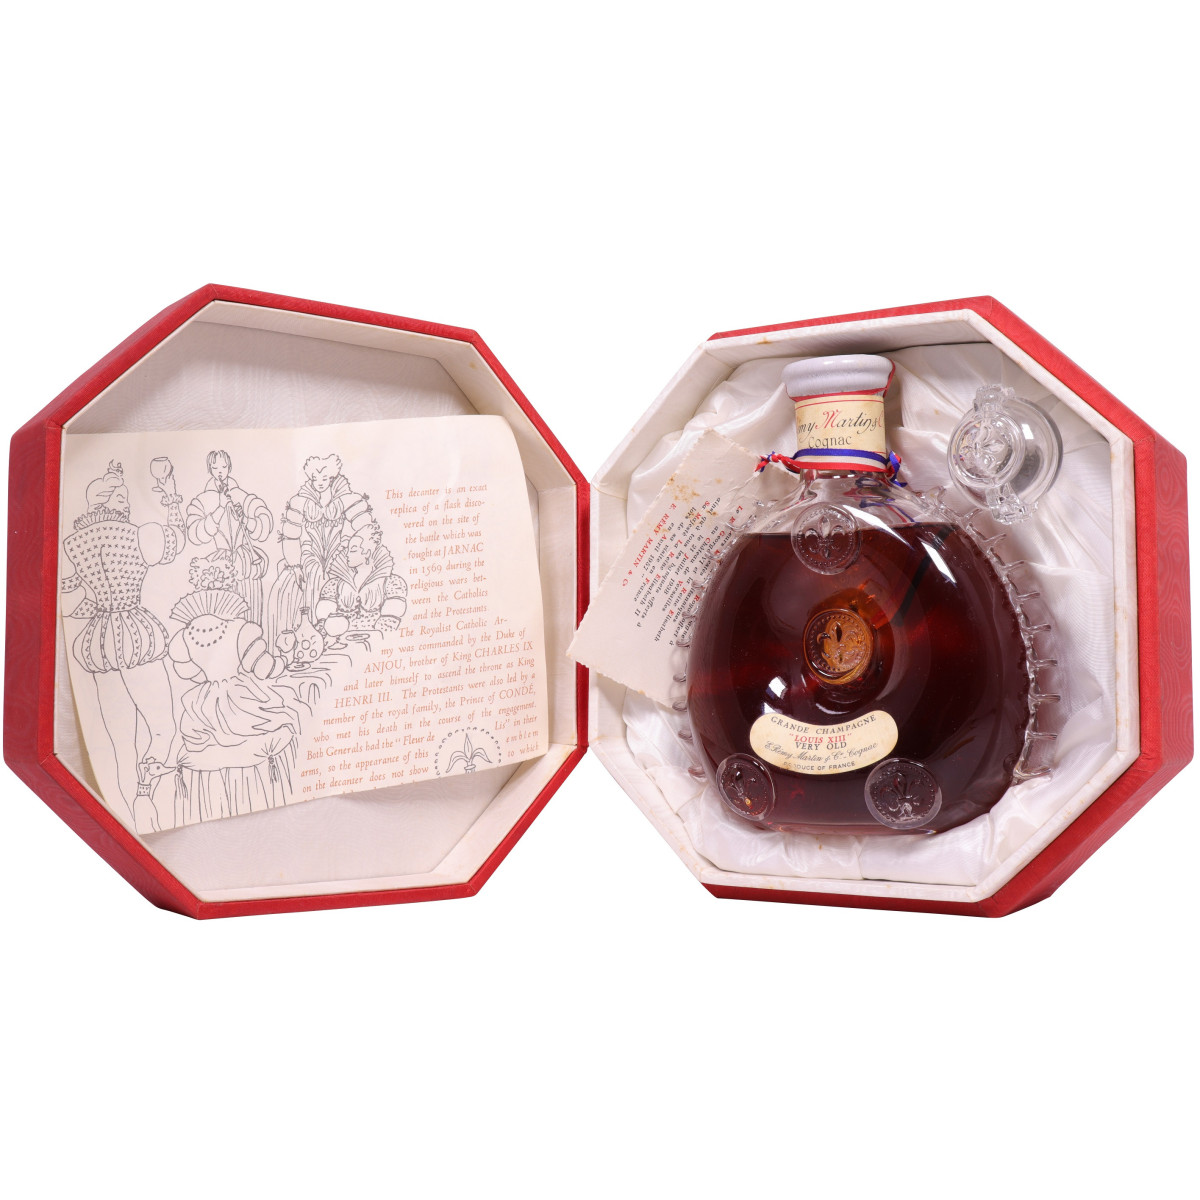 Sold at Auction: Baccarat, Baccarat Crystal LE Remy Martin Louis XIII Bottle